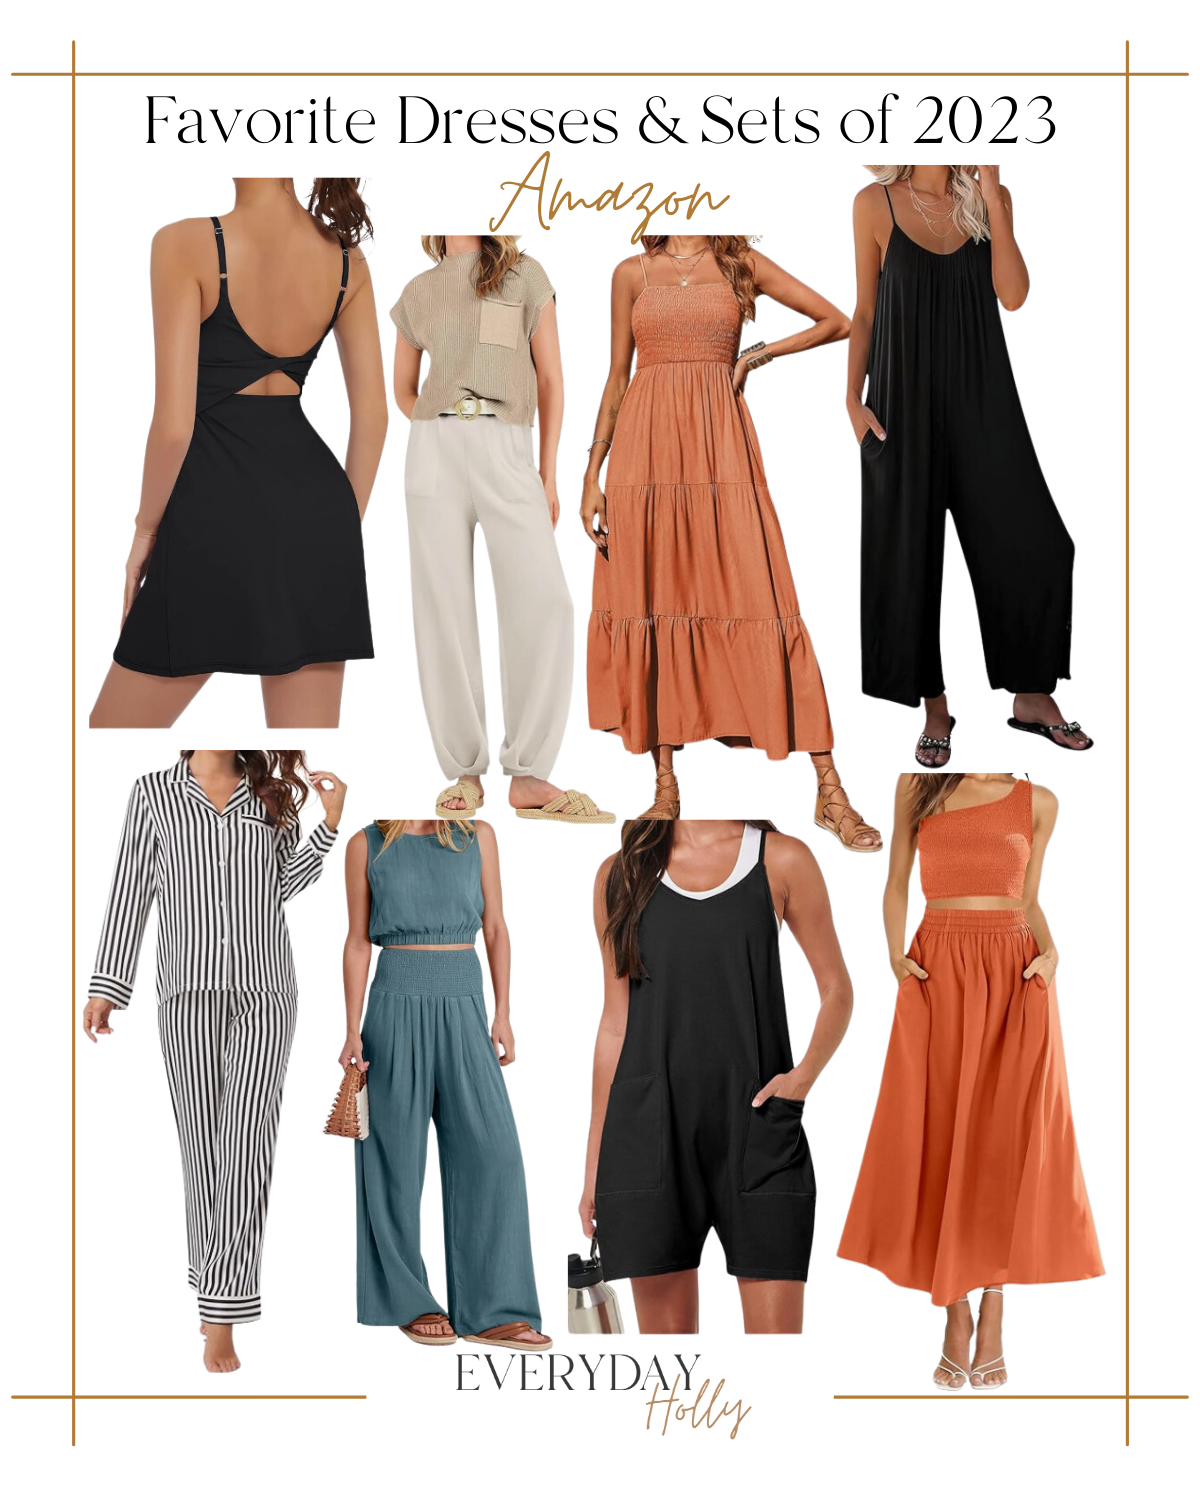 top 23 fashion favorites of 2023 | top 23 of 2023, fashion, fashion favorites, fashion finds, outfit inspo, dresses, matching sets, romper, two piece set, summer outfit, spring outfit, pajamas